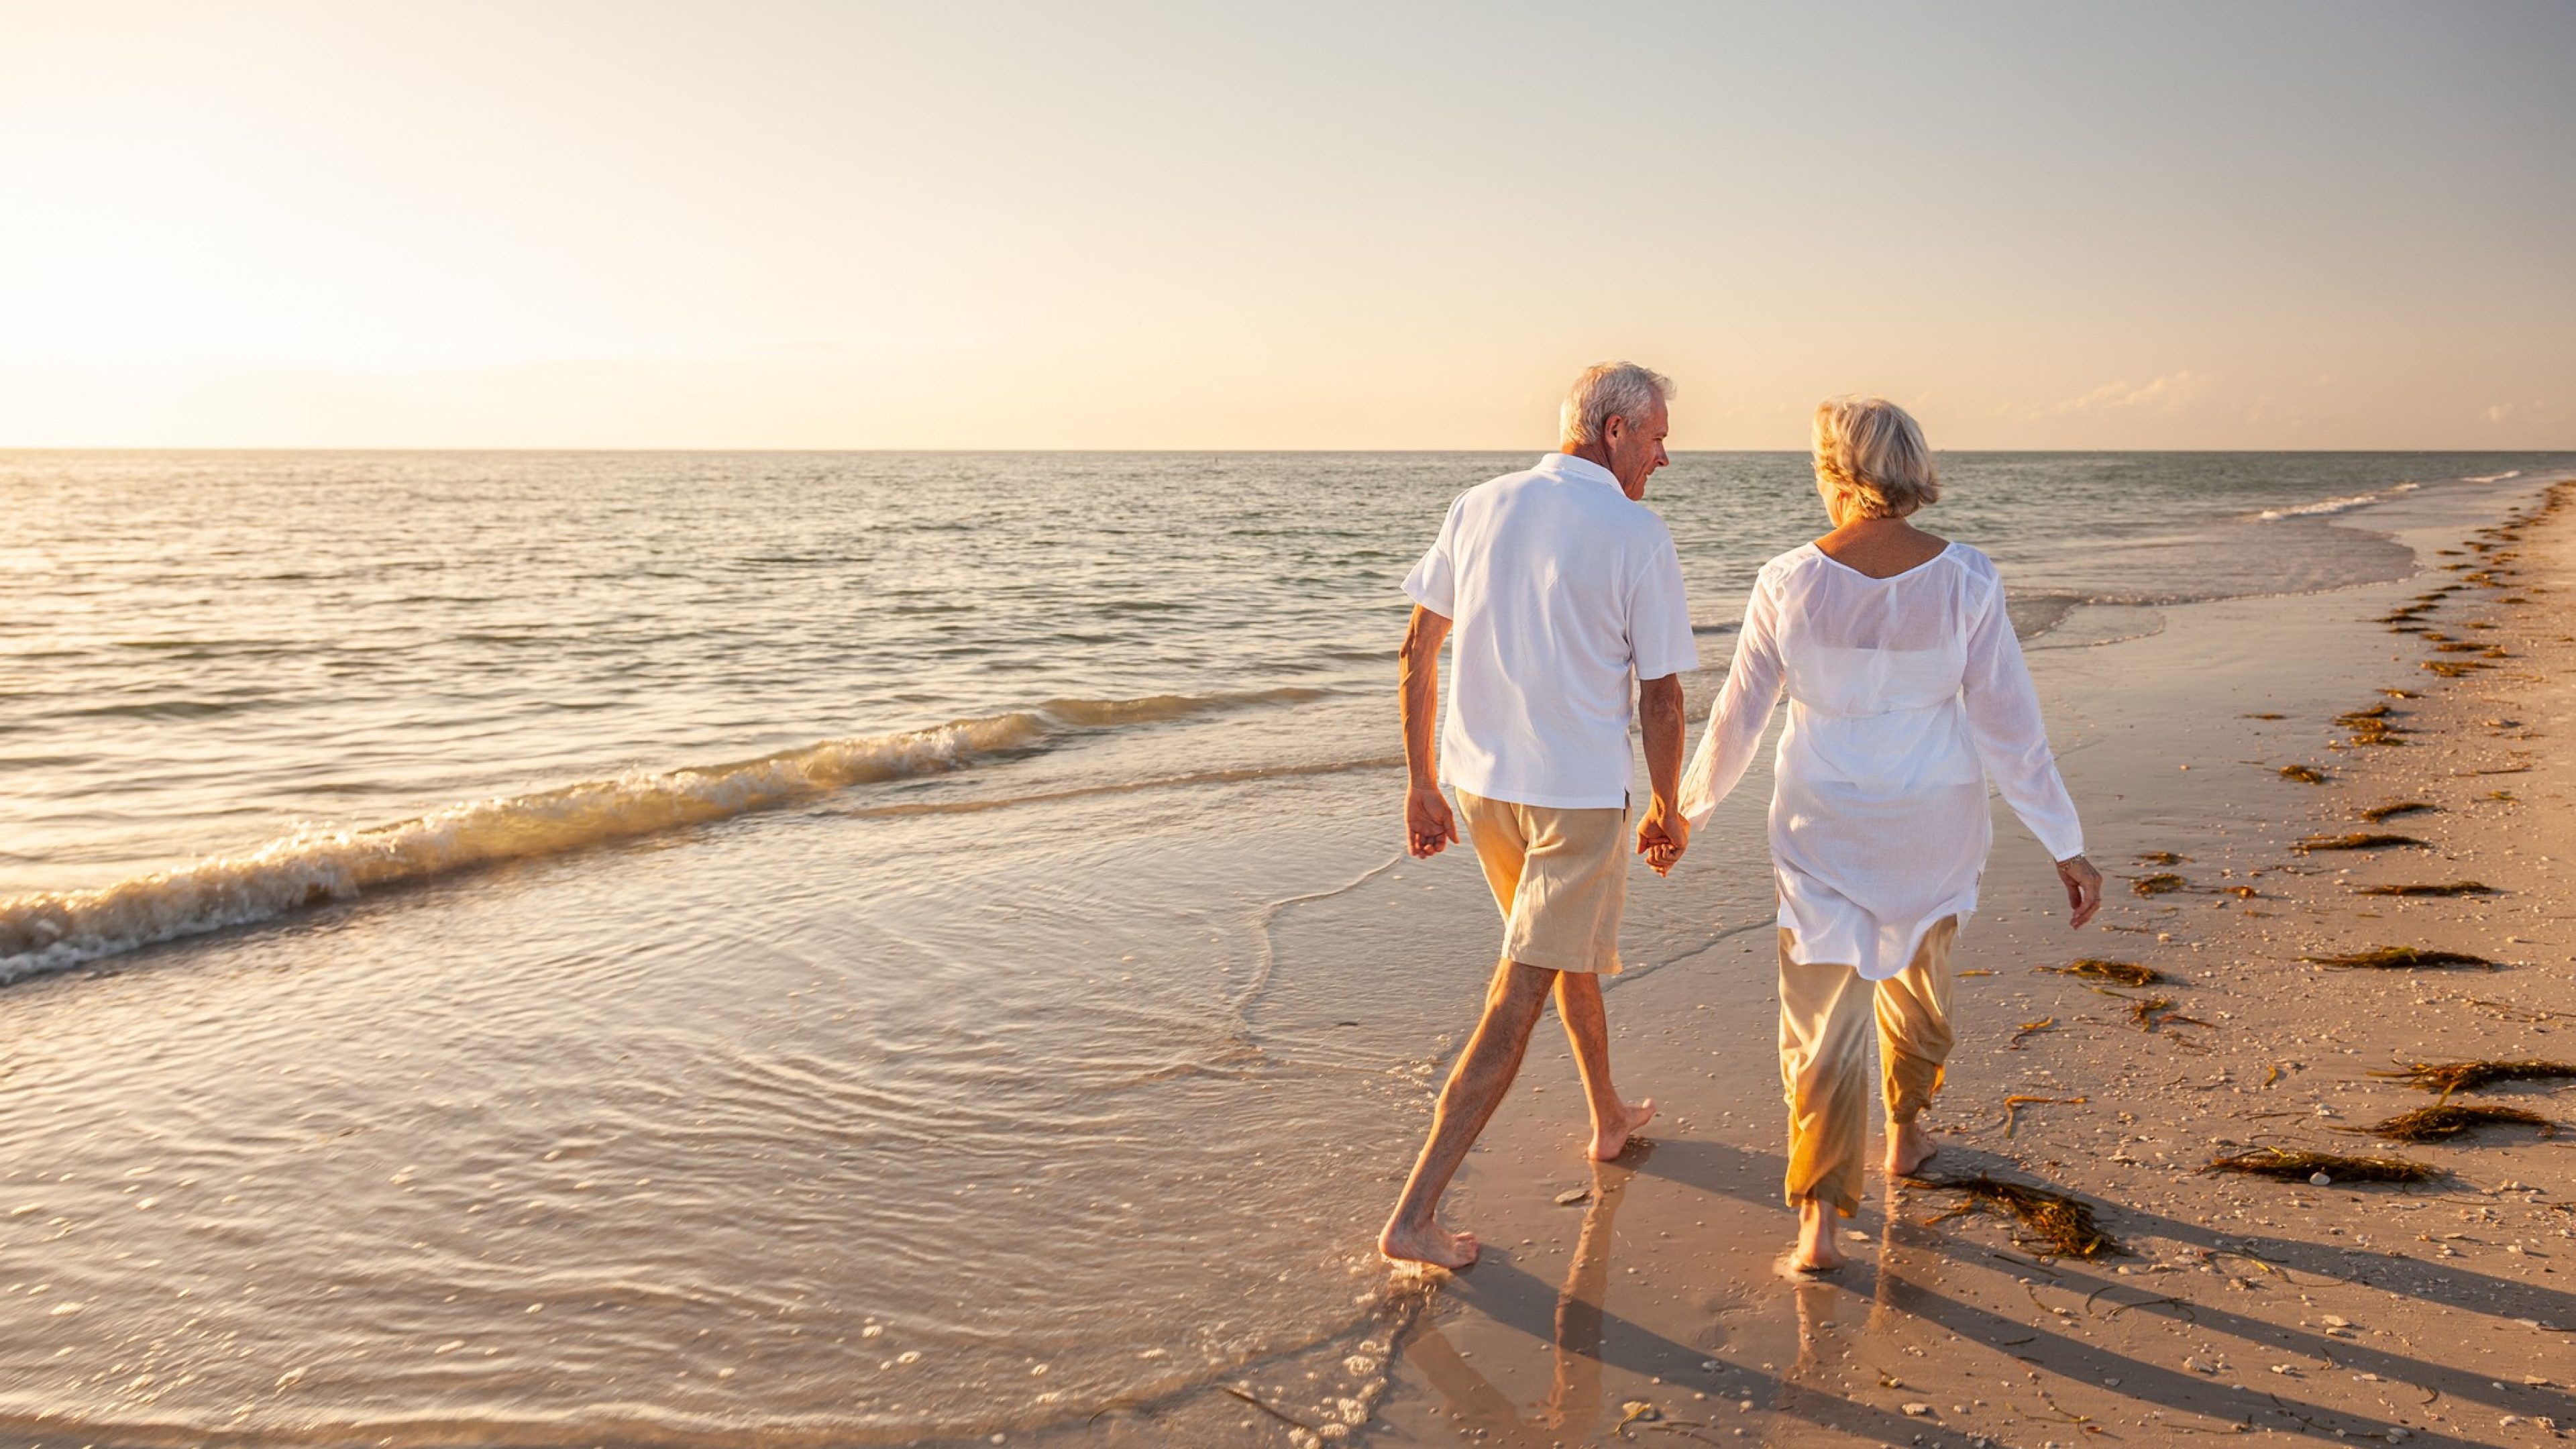 A retired couple walking hand in hand along a beach